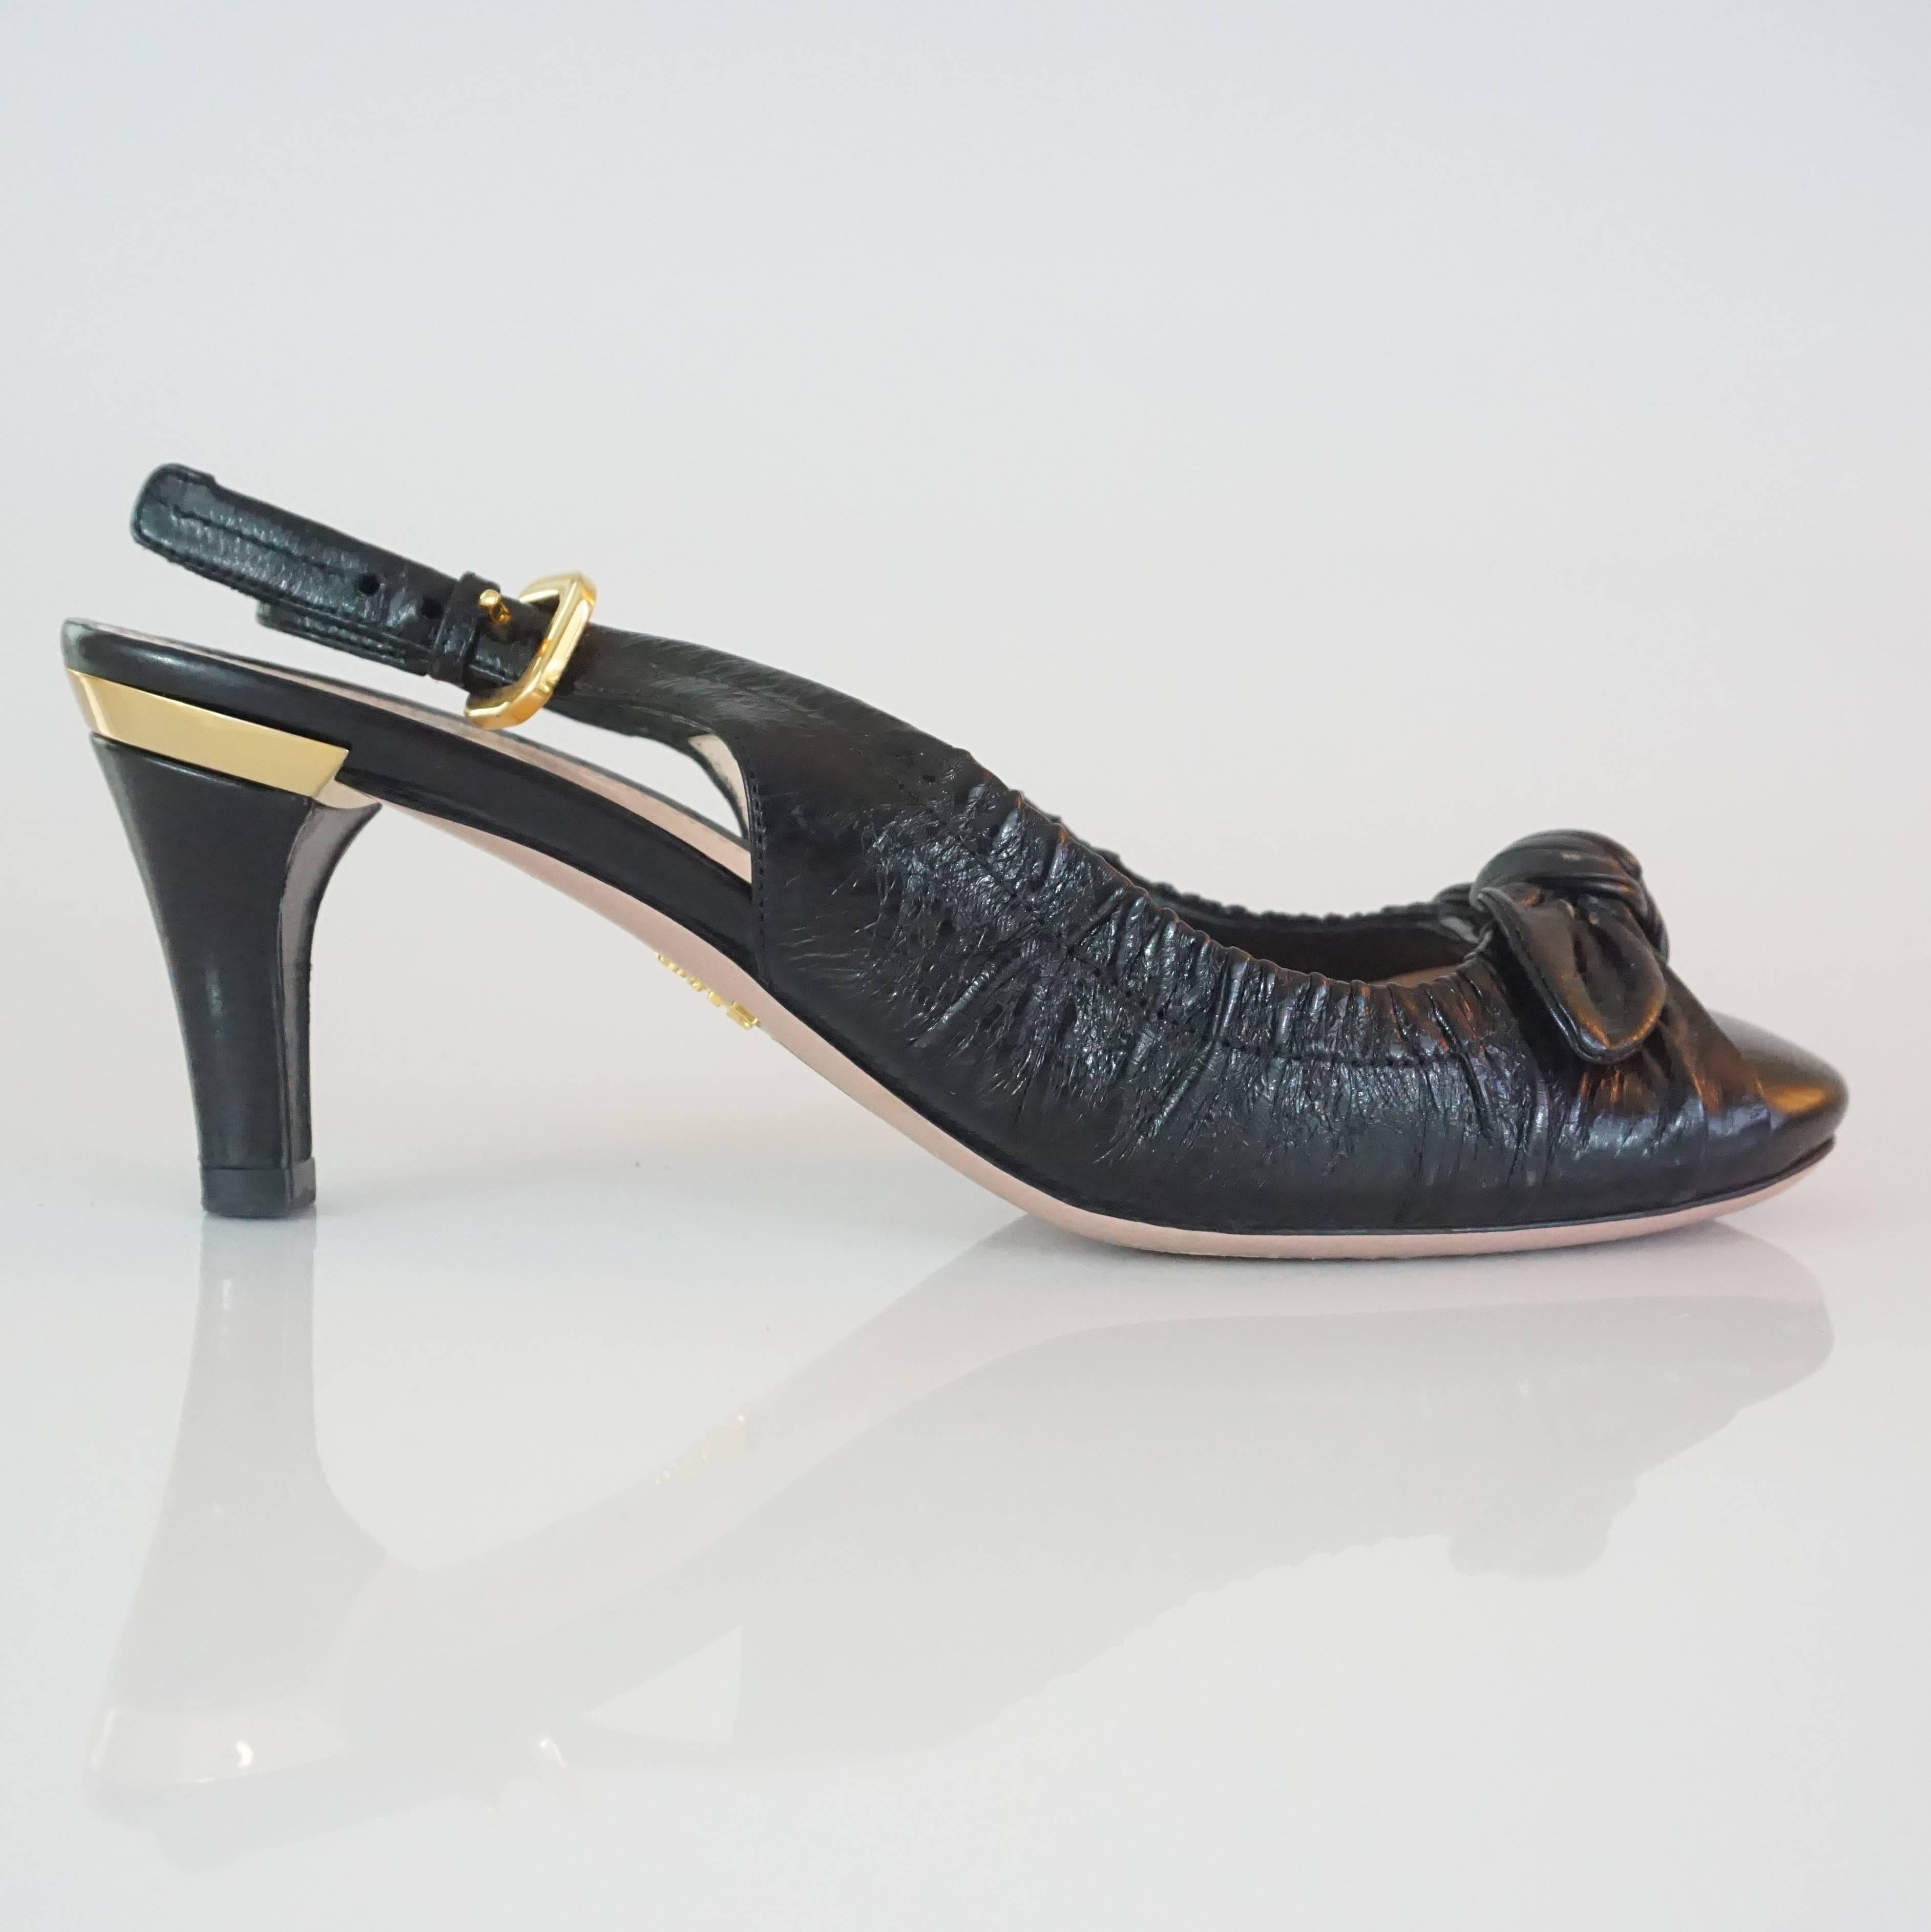 Prada Black Leather Ruched Slingback Heels - 36.5. These heels have a classic look. They a ruched all over with a front tie and have a gold plaque with the Prada logo at the top of each heel. They are in very good condition with some bottom wear and